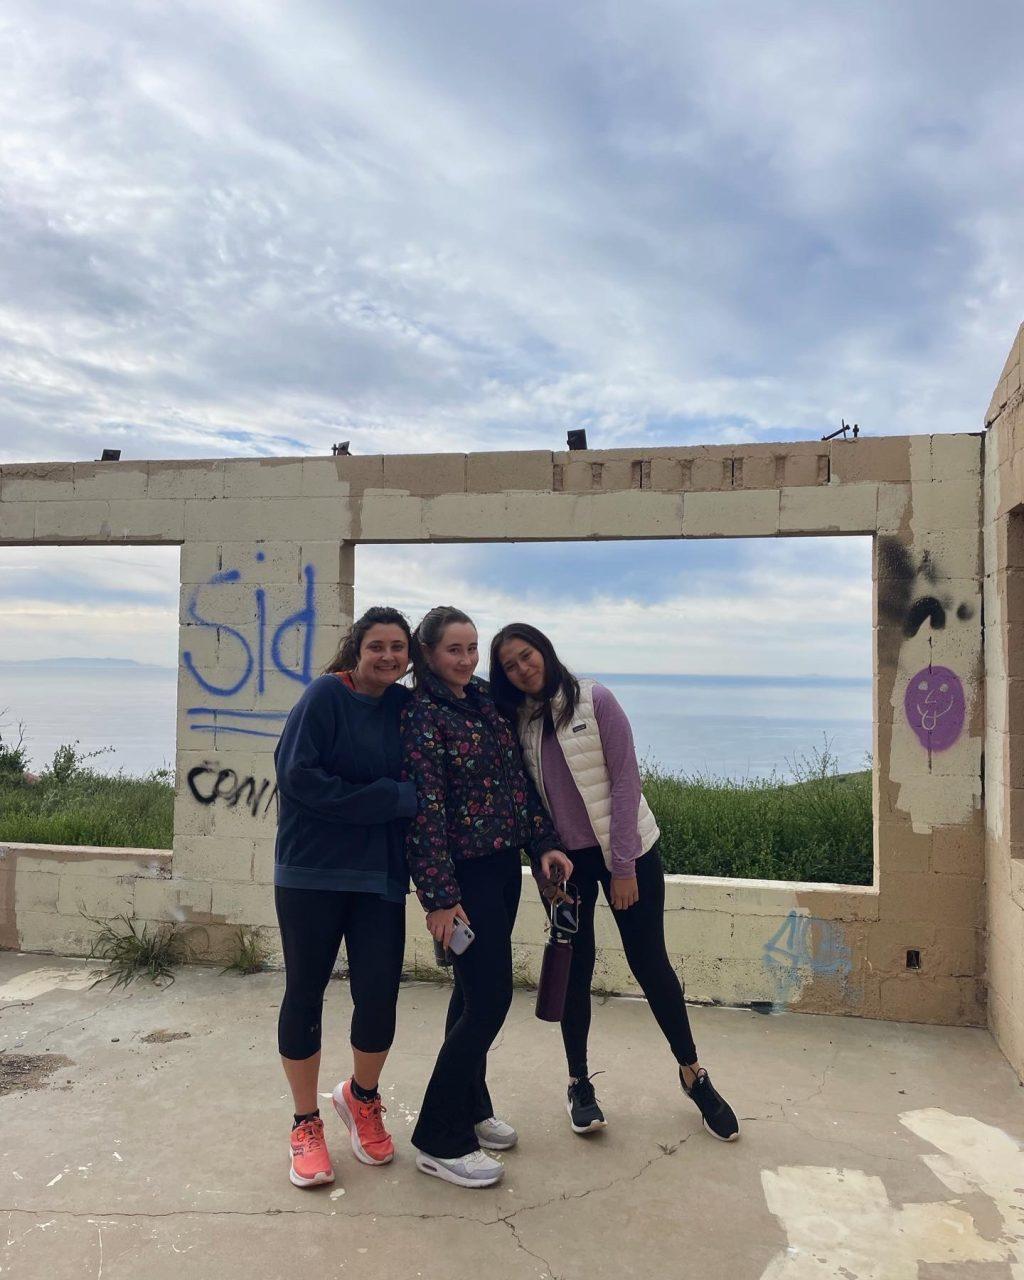 Lead Designer Skyler Hawkins (middle) and former designer Lisette Isiordia ('23) (right) and I posing (left) while on a hike in Malibu in February. Hikes with friends have been some of my top Pepperdine memories.